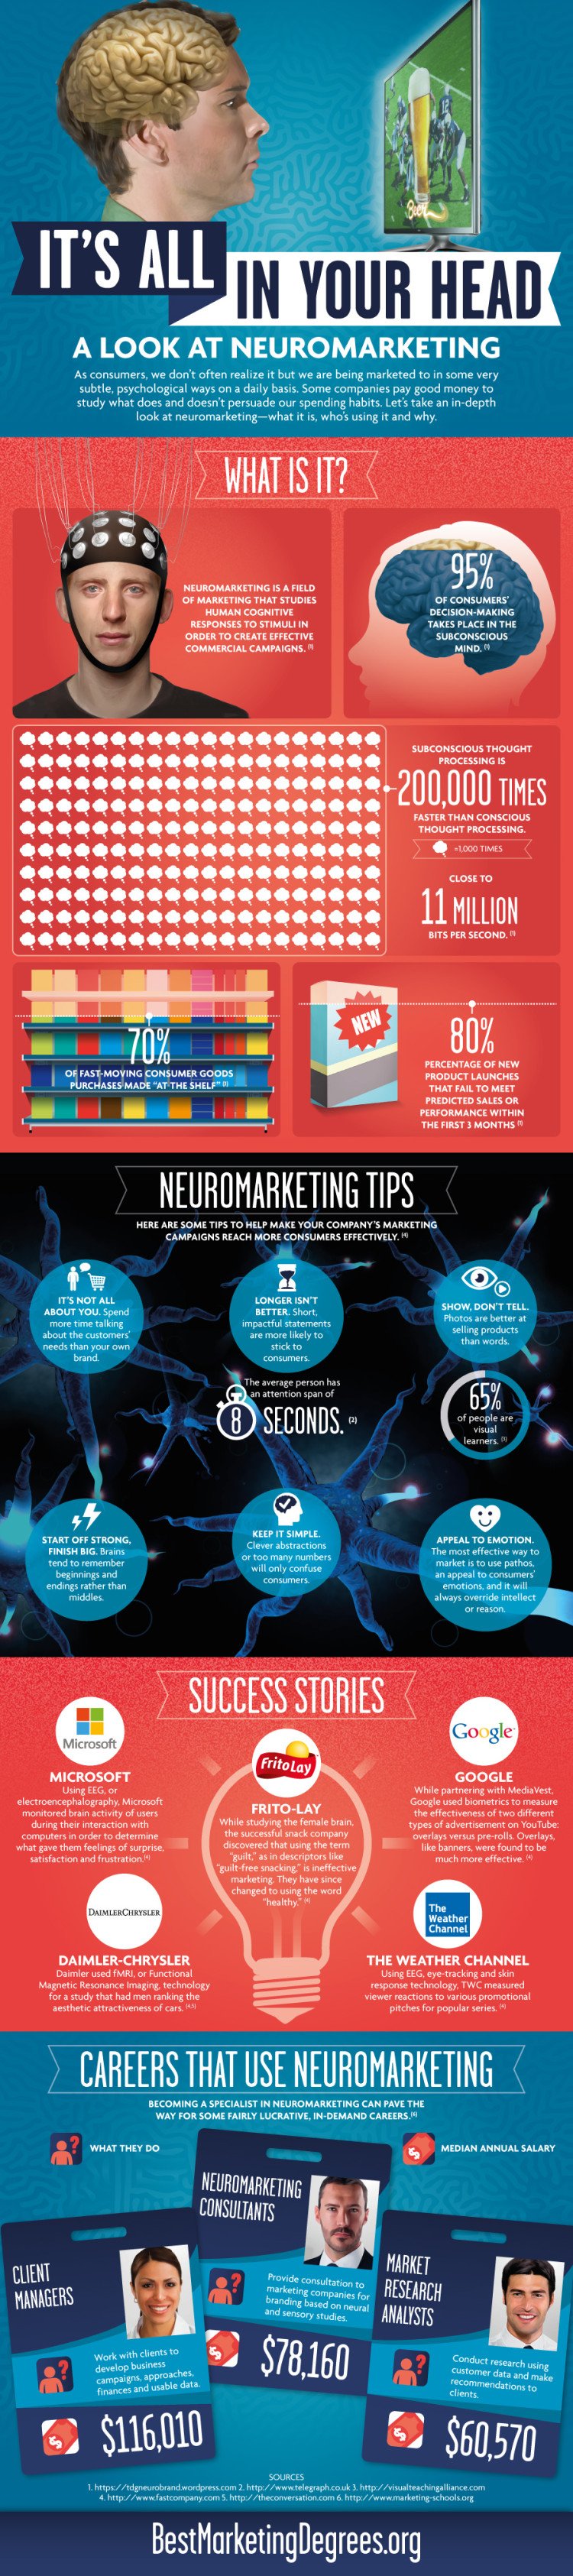 A Look at Neuromarketing [Infographic]